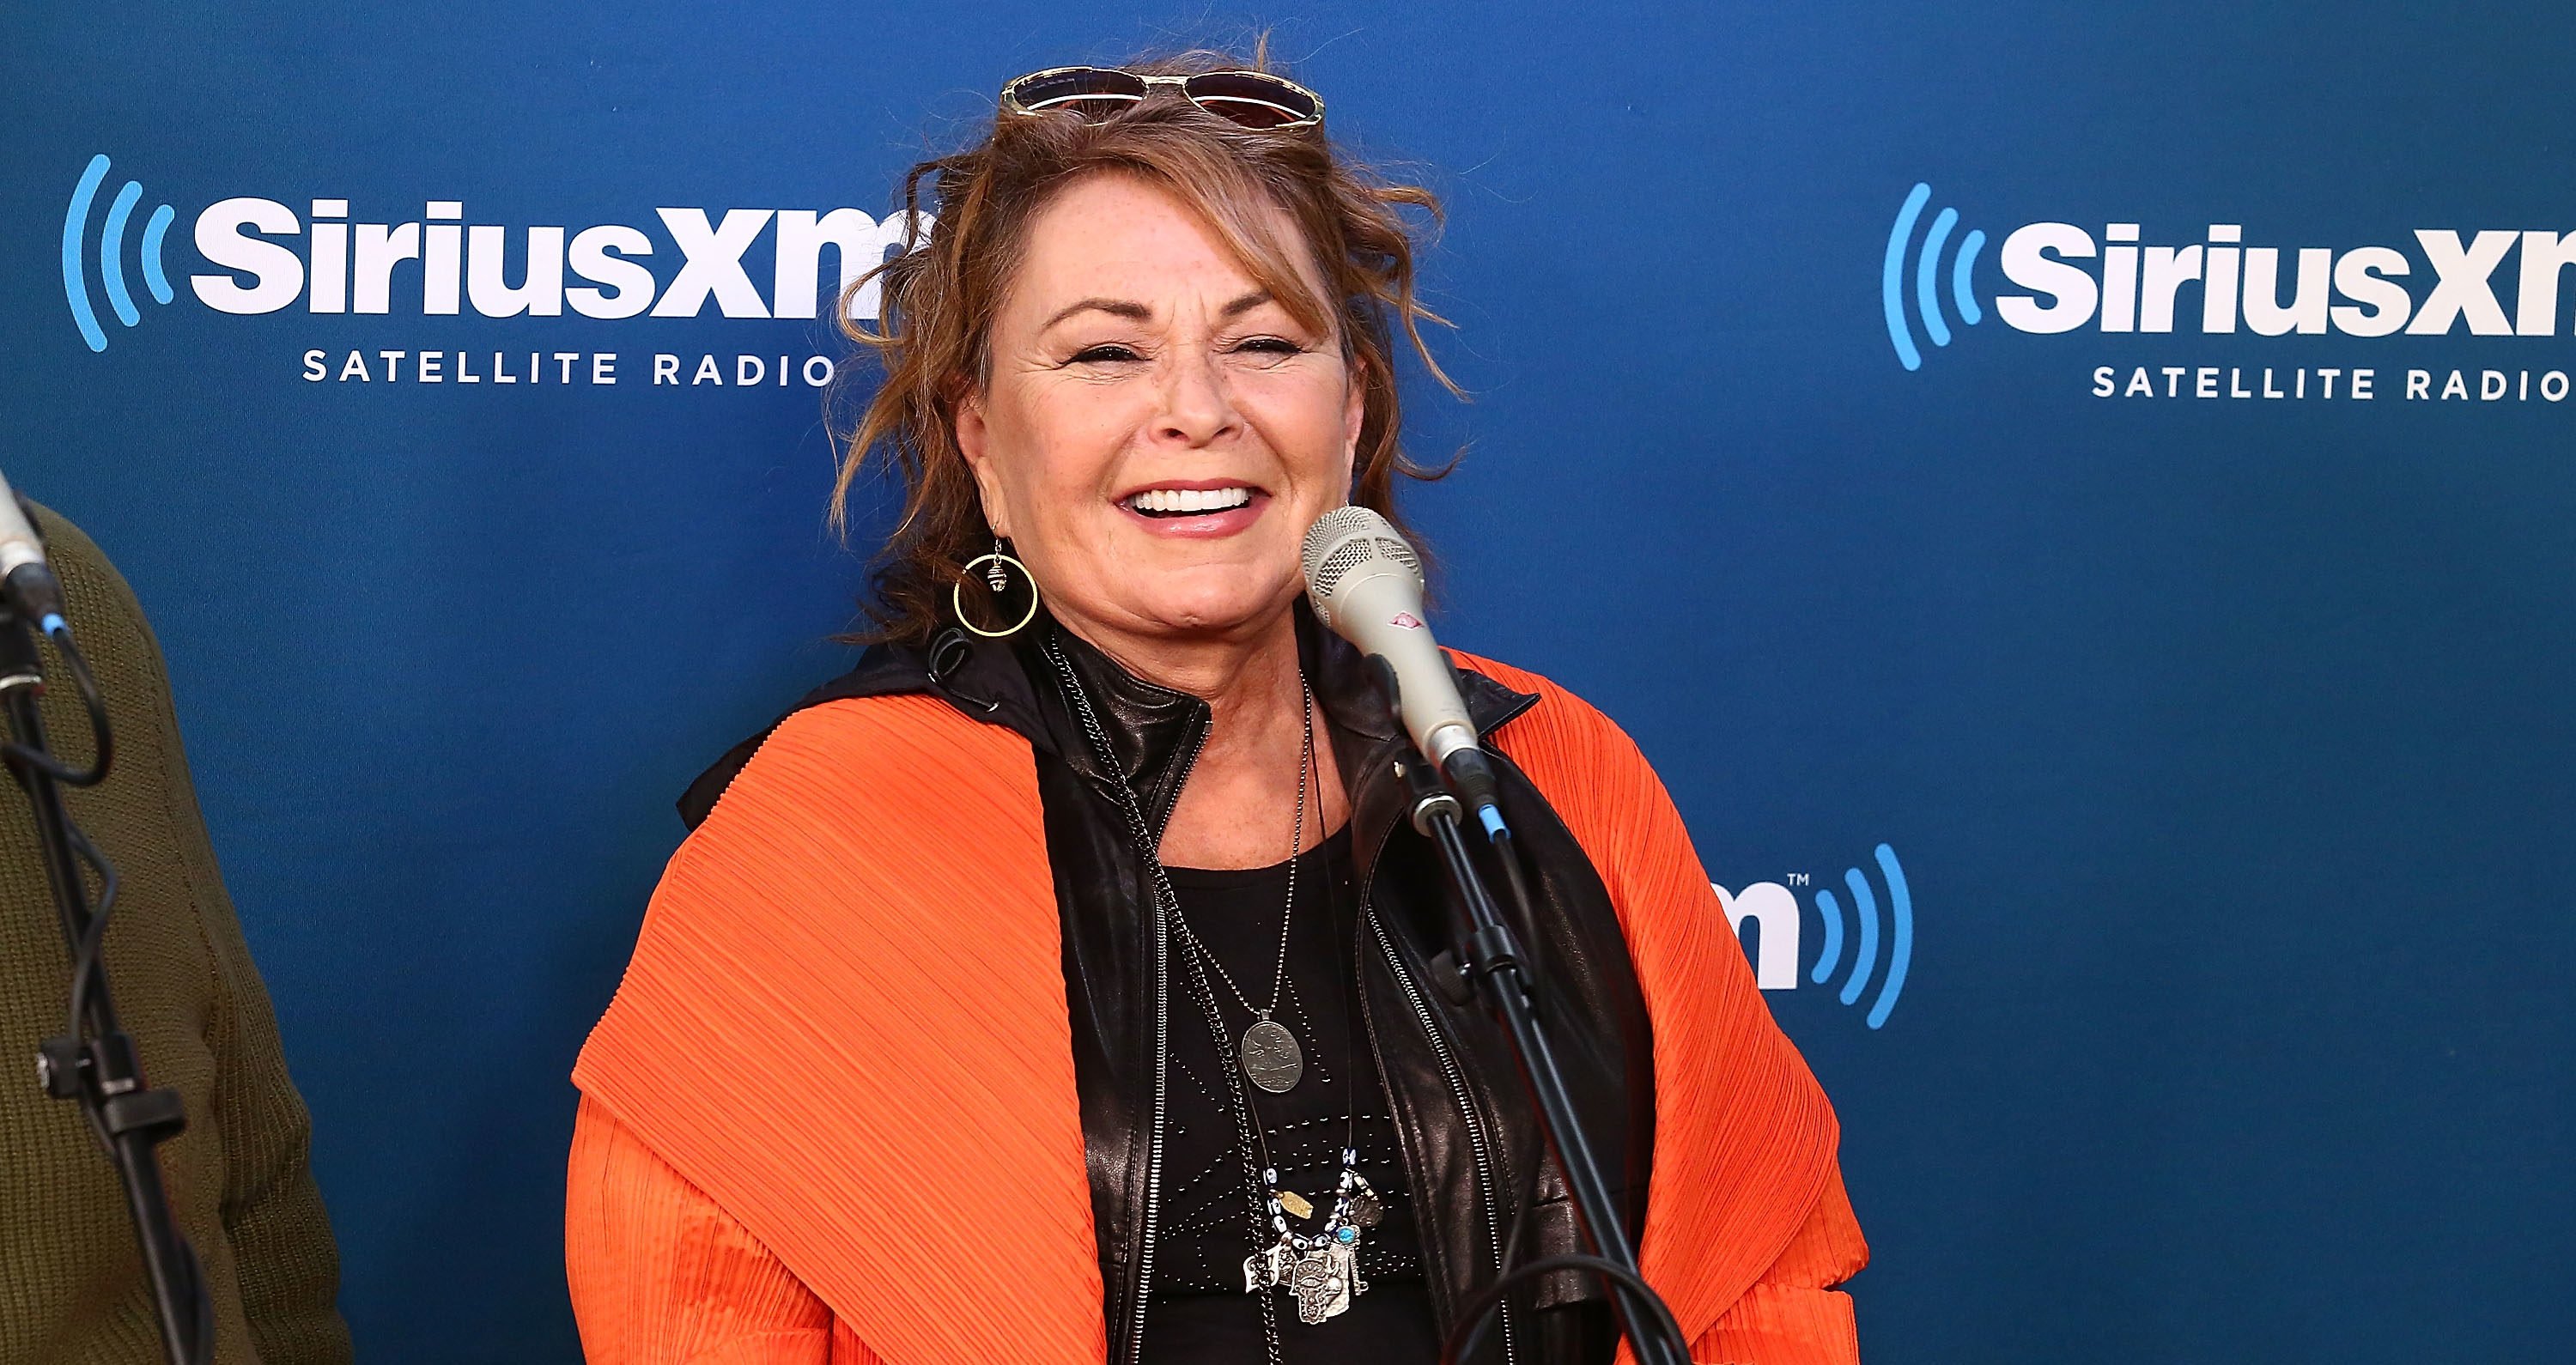 NEW YORK, NY - MARCH 27: Actress Roseanne Barr speaks during SiriusXM's Town Hall with the cast of Roseanne on March 27, 2018 in New York City. (Photo by Astrid Stawiarz/Getty Images for SiriusXM)